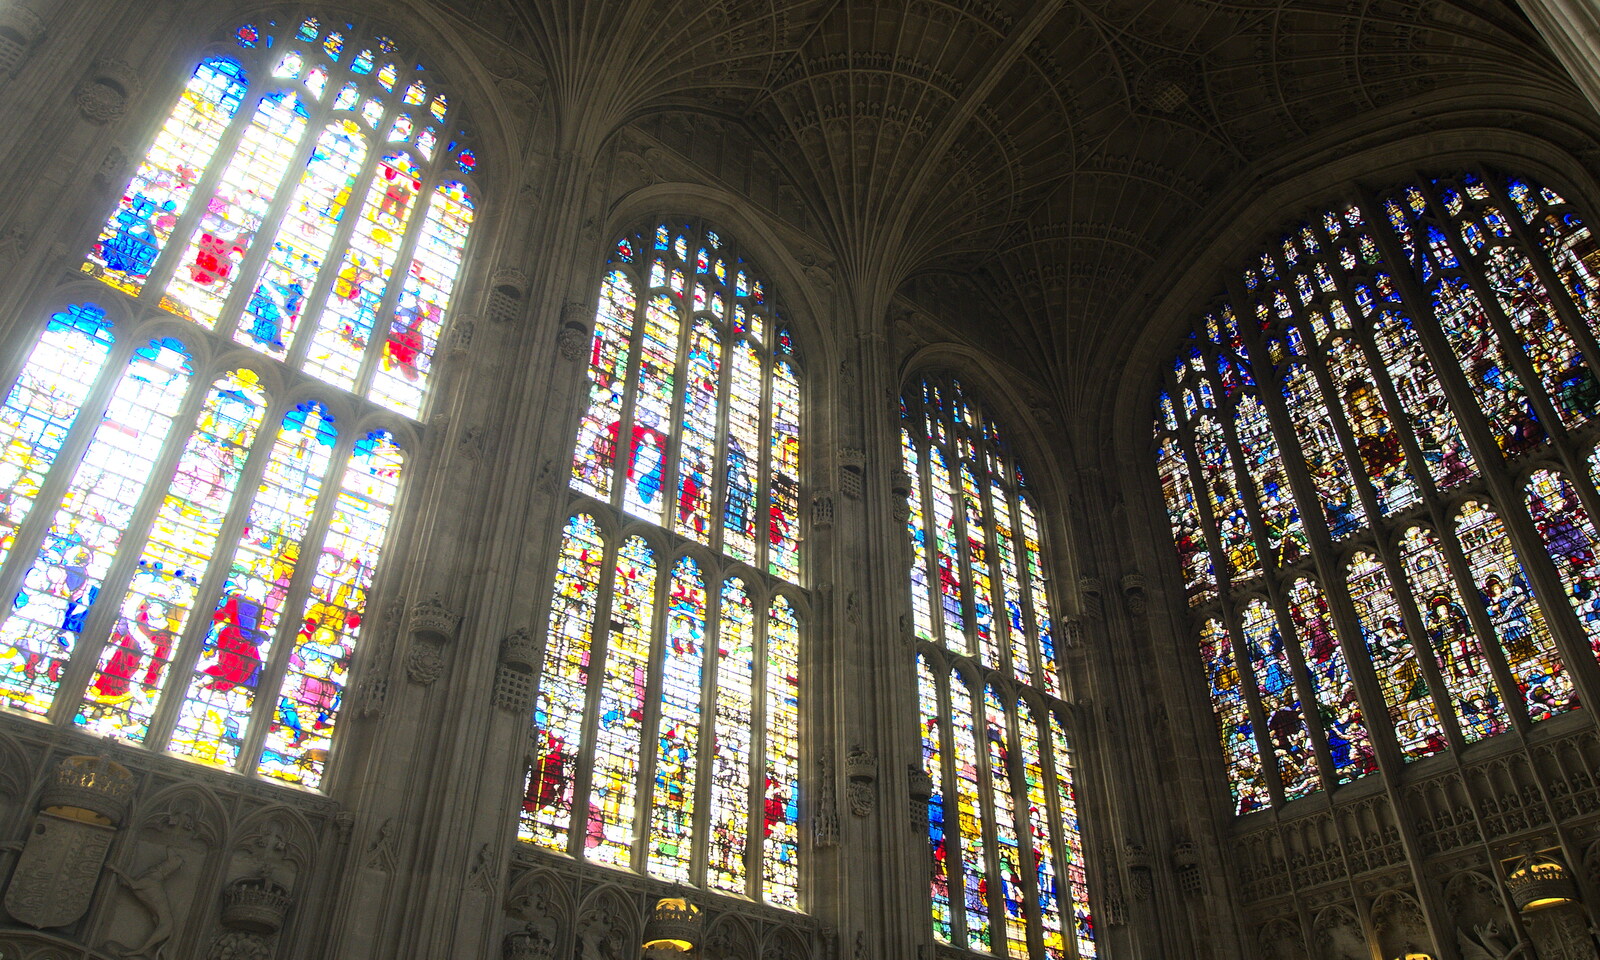 Large stained glass windows in King's from Punting With Grandad, Cambridge, Cambridgeshire - 6th June 2015